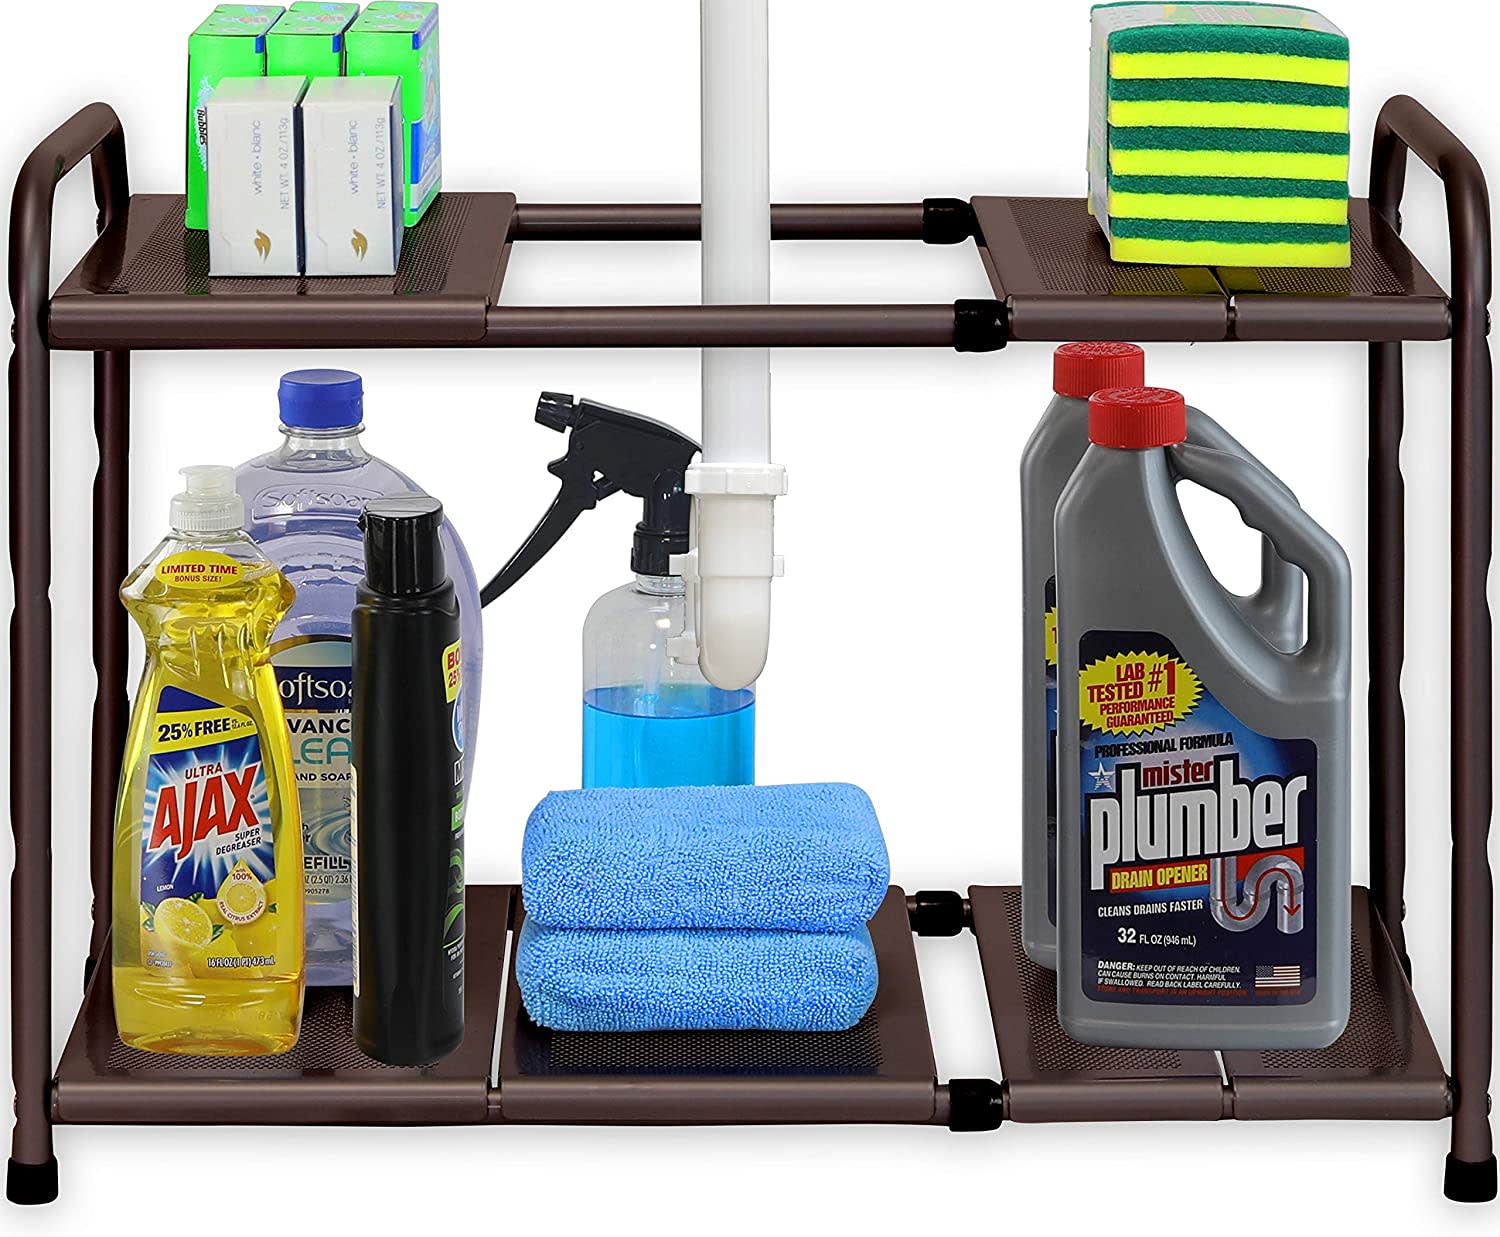 http://cdn.apartmenttherapy.info/image/upload/v1626888745/at/product%20listing/Simplehousewares_Under_Sink_2Tier_Expandable_Shelf.jpg